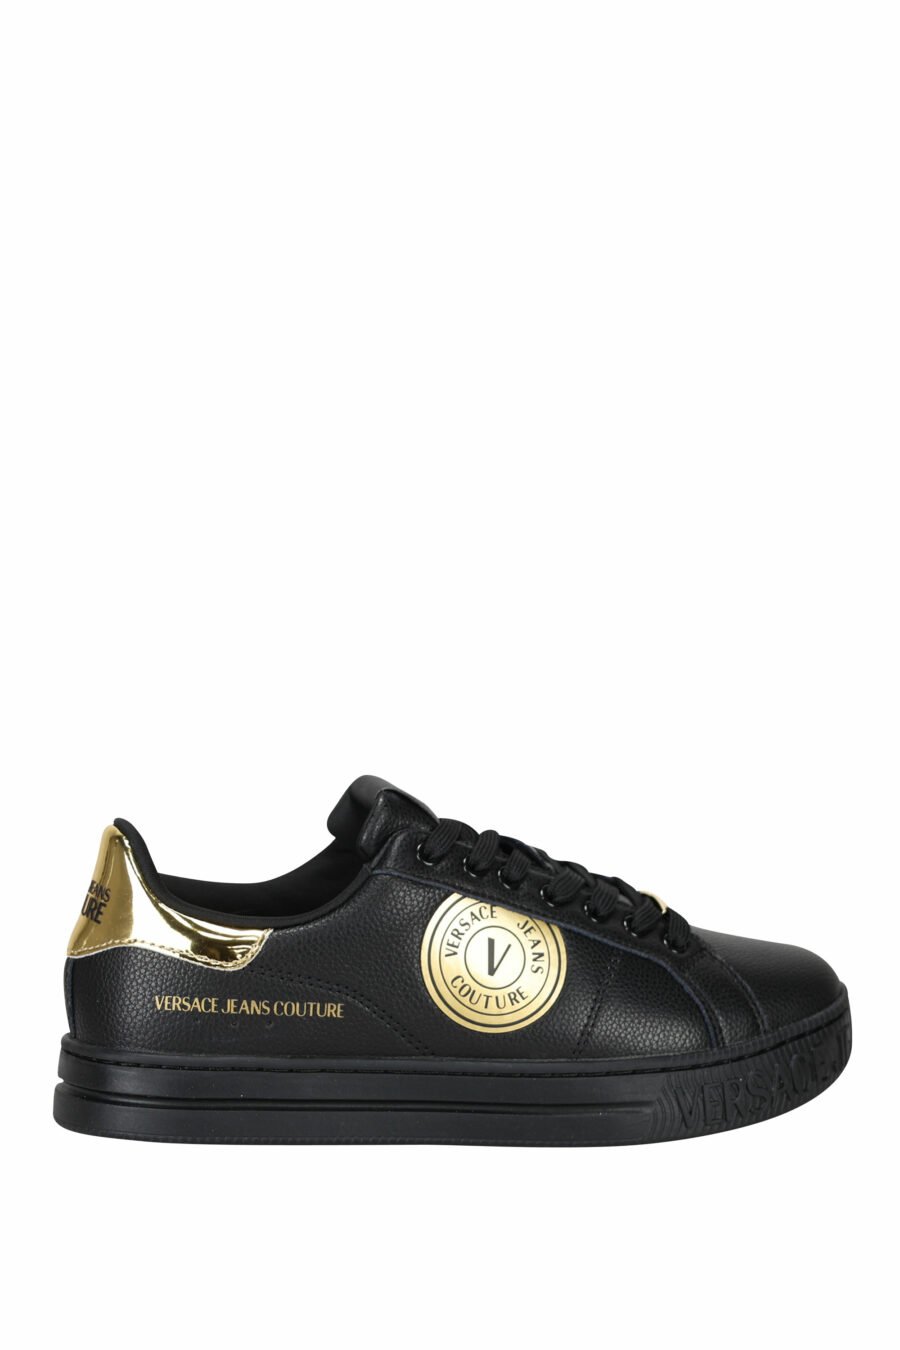 Black leather trainers with gold details and circular logo - 8052019453560